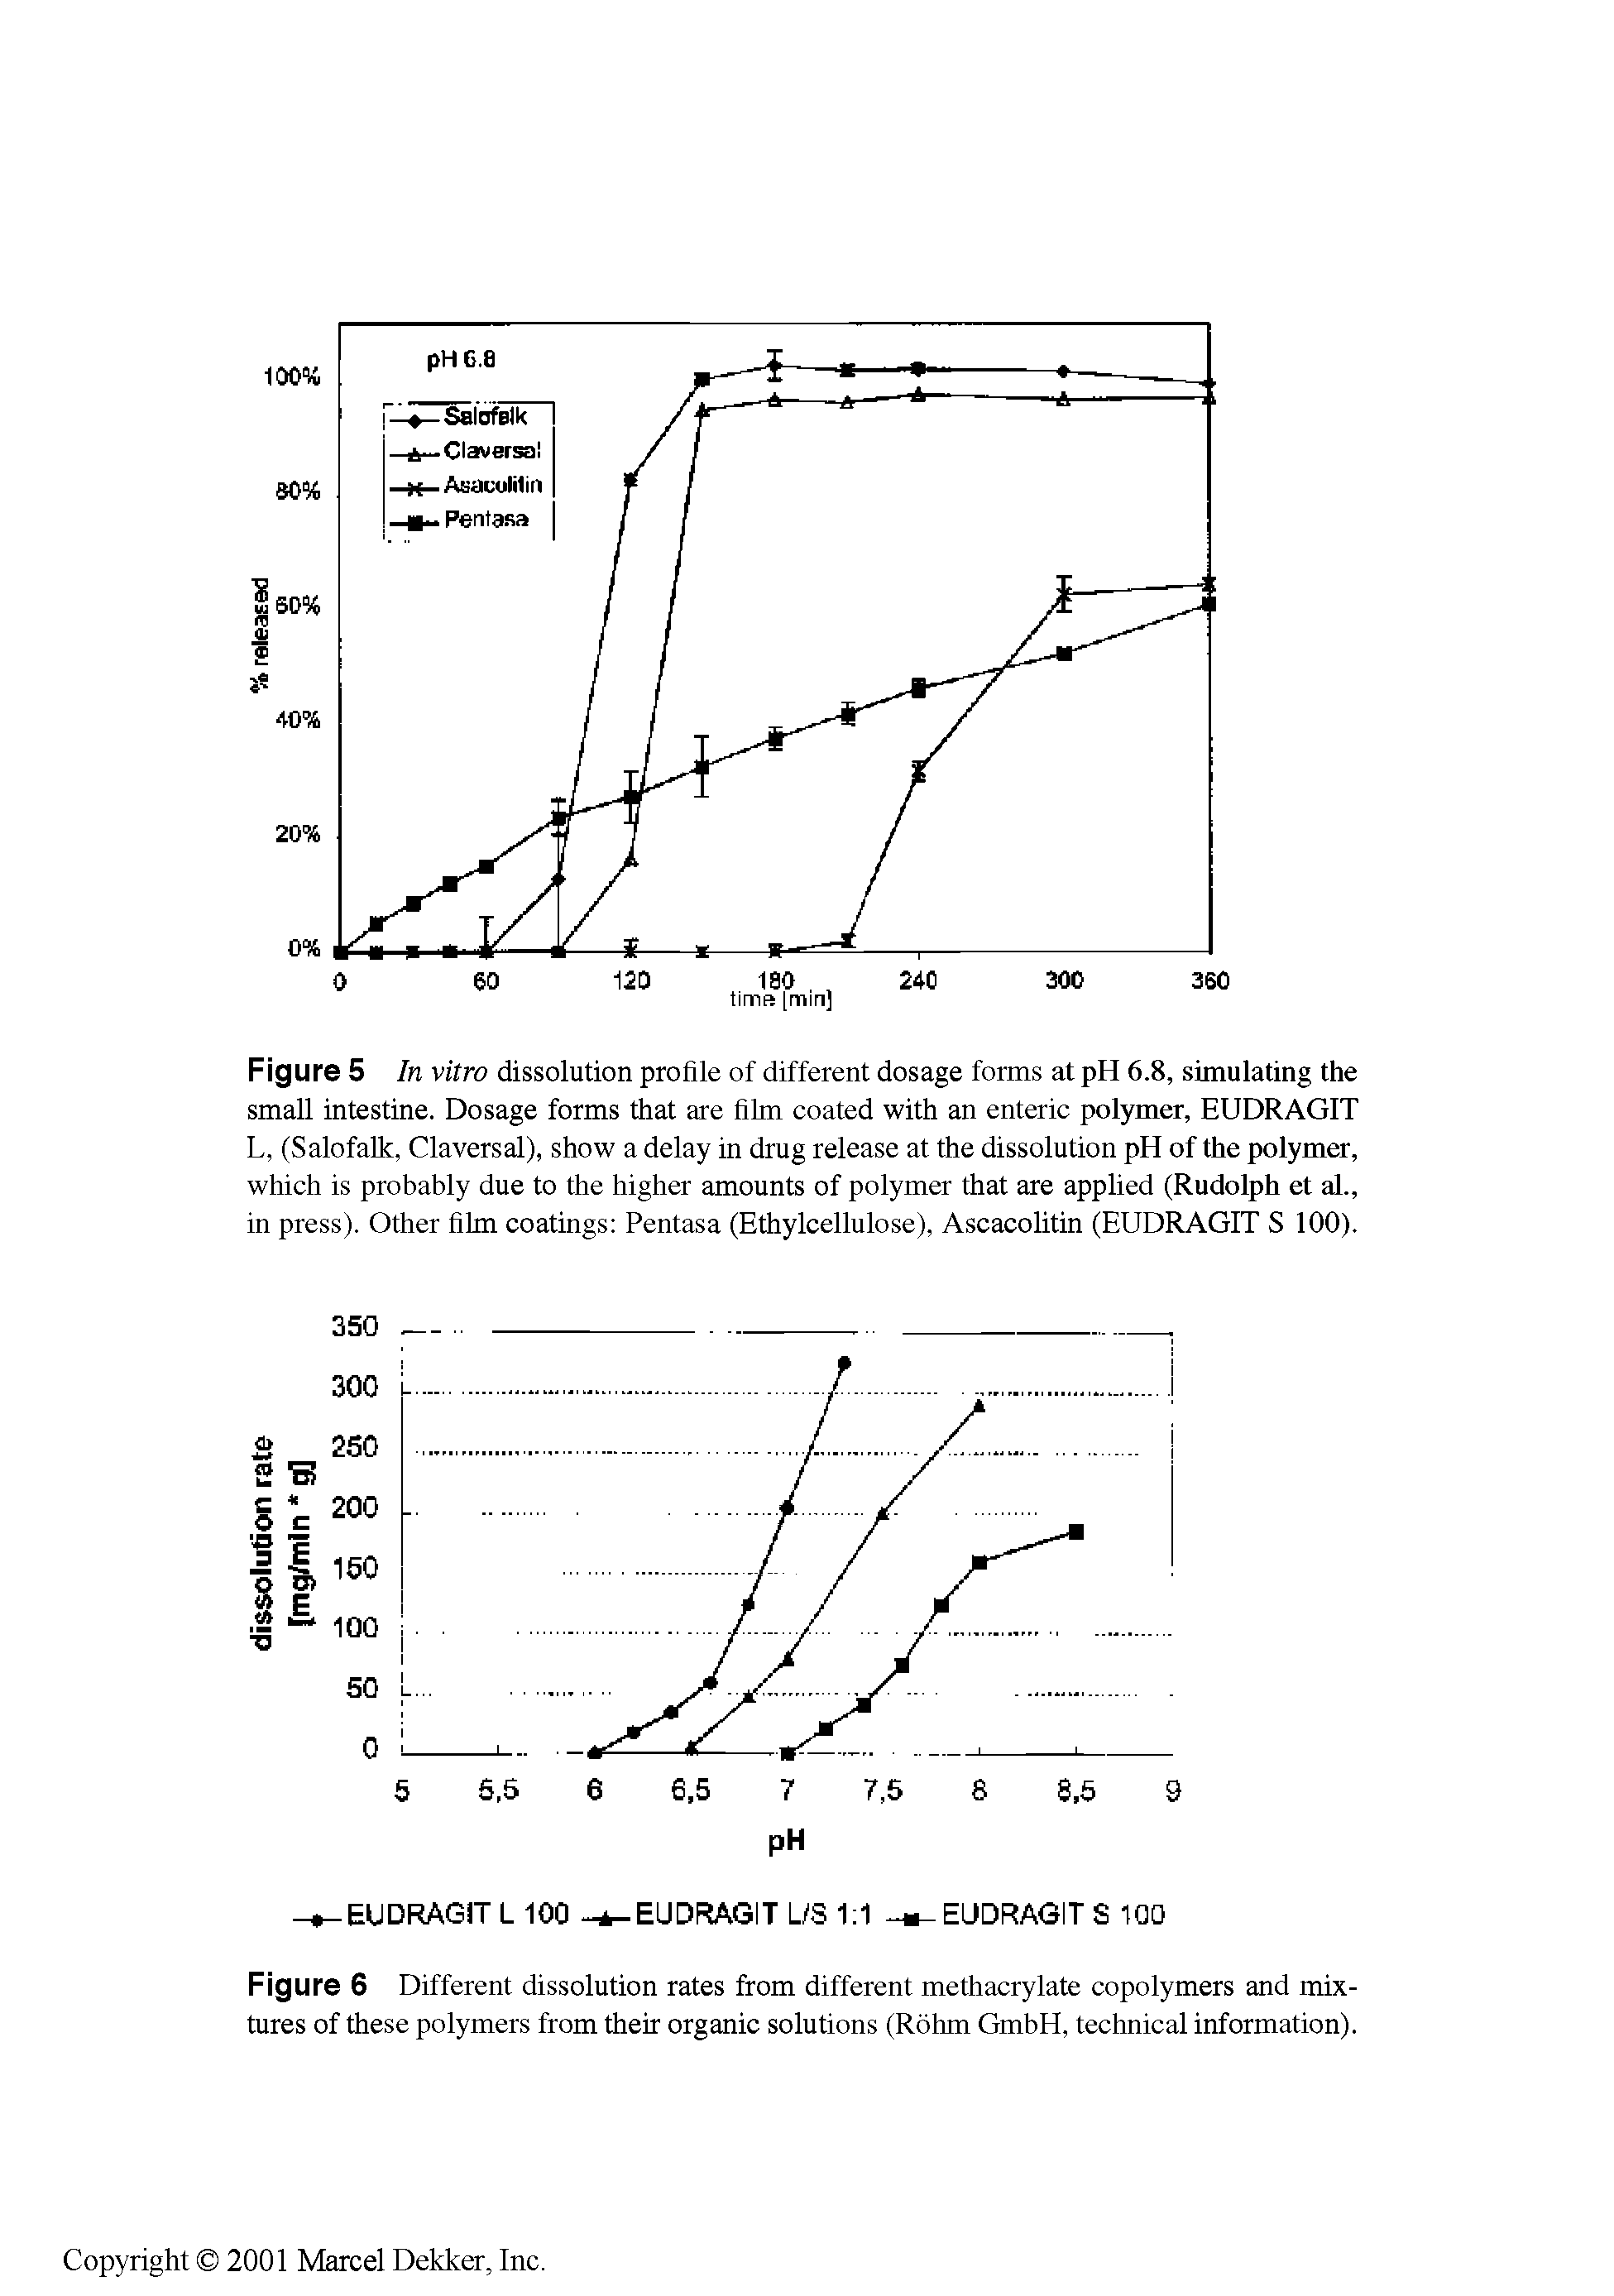 Figure 6 Different dissolution rates from different methacrylate copolymers and mixtures of these polymers from their organic solutions (Rohm GmbH, technical information).